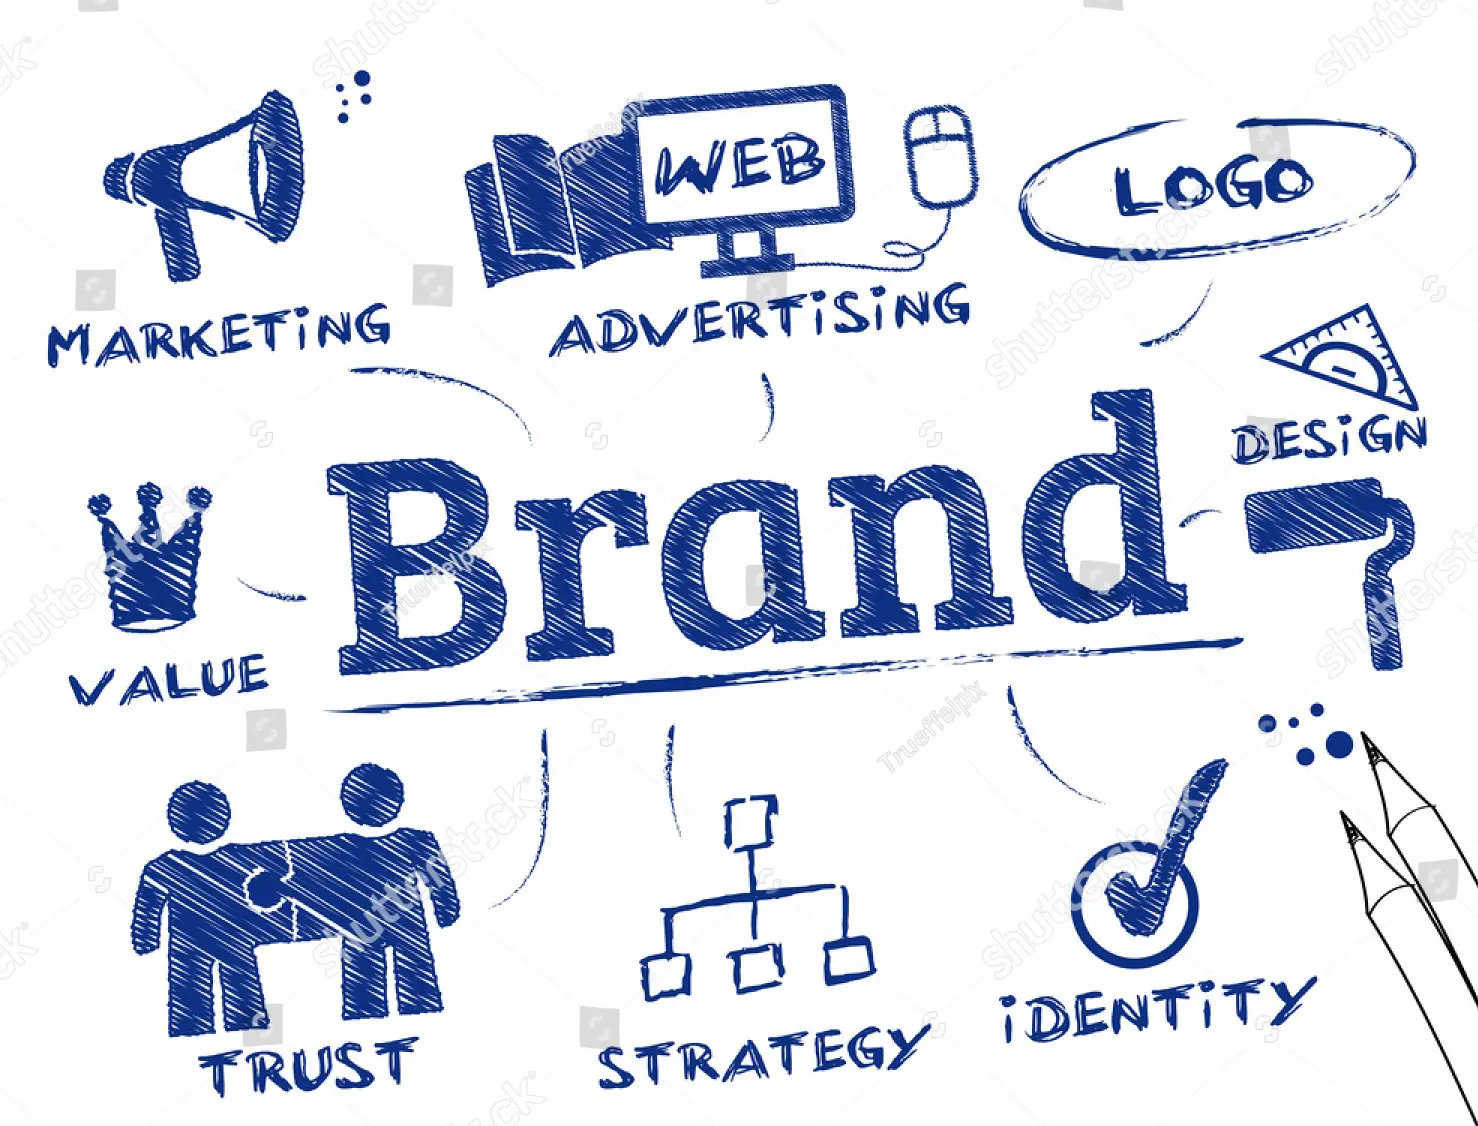 3 Key Tips for Brand Extension